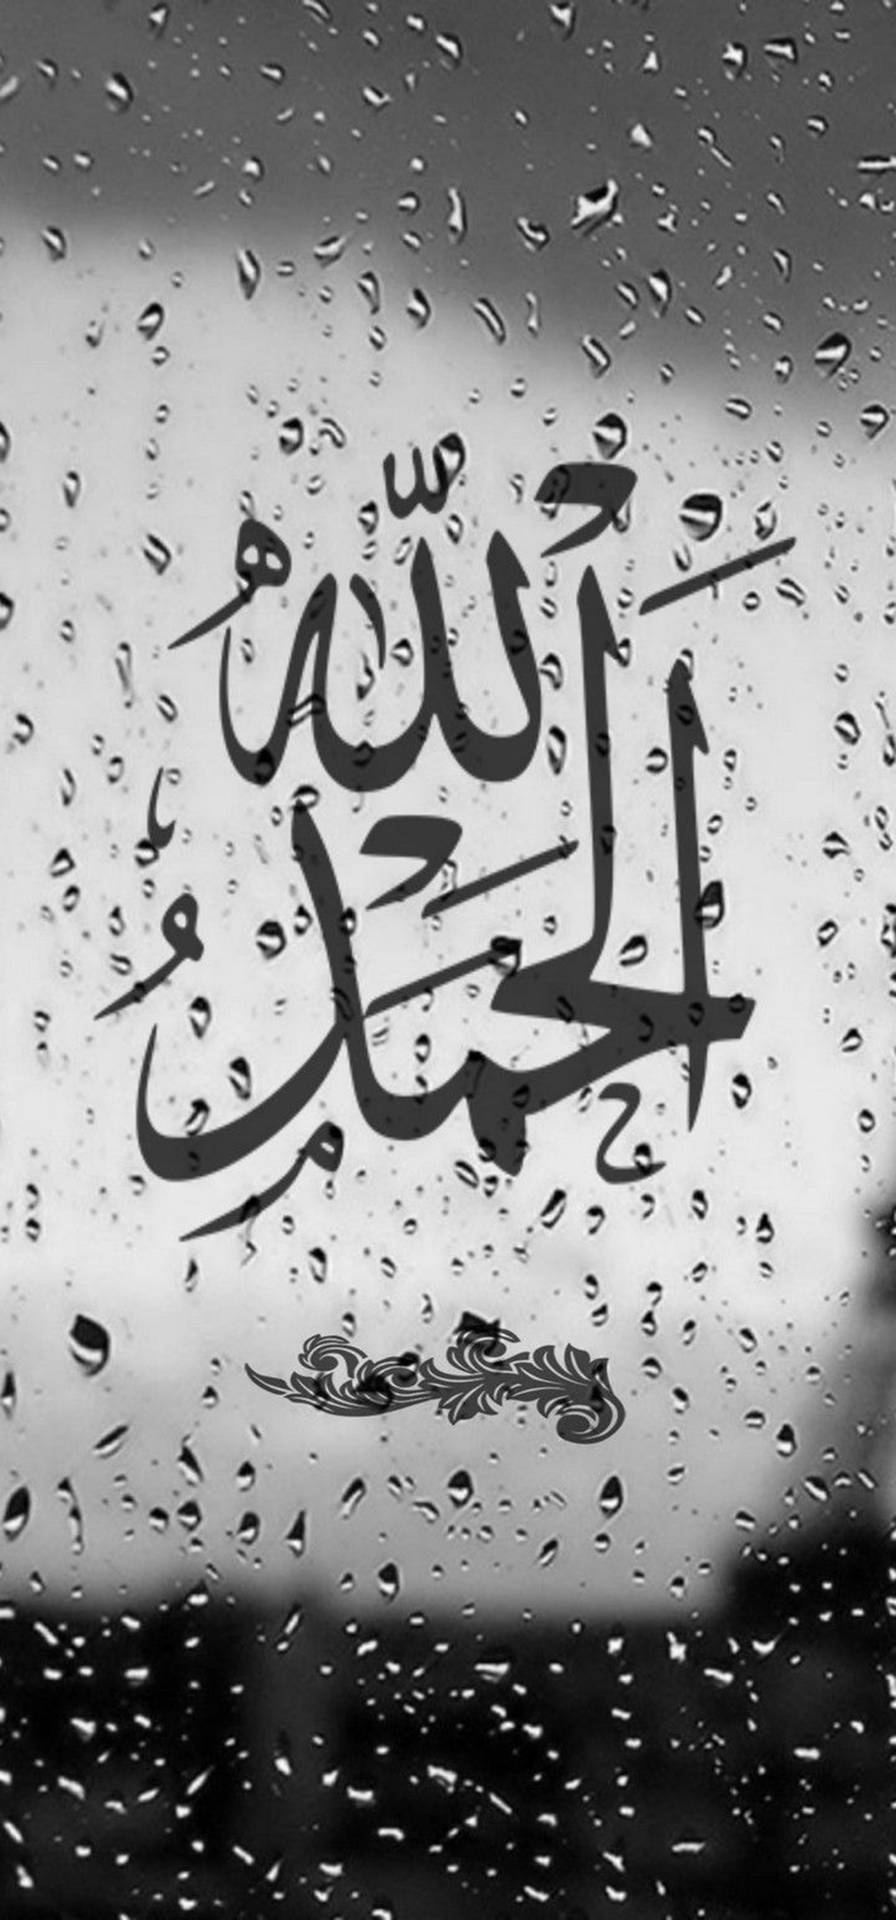 Alhamdulillah wallpaper by Hashi24  Download on ZEDGE  5a3f